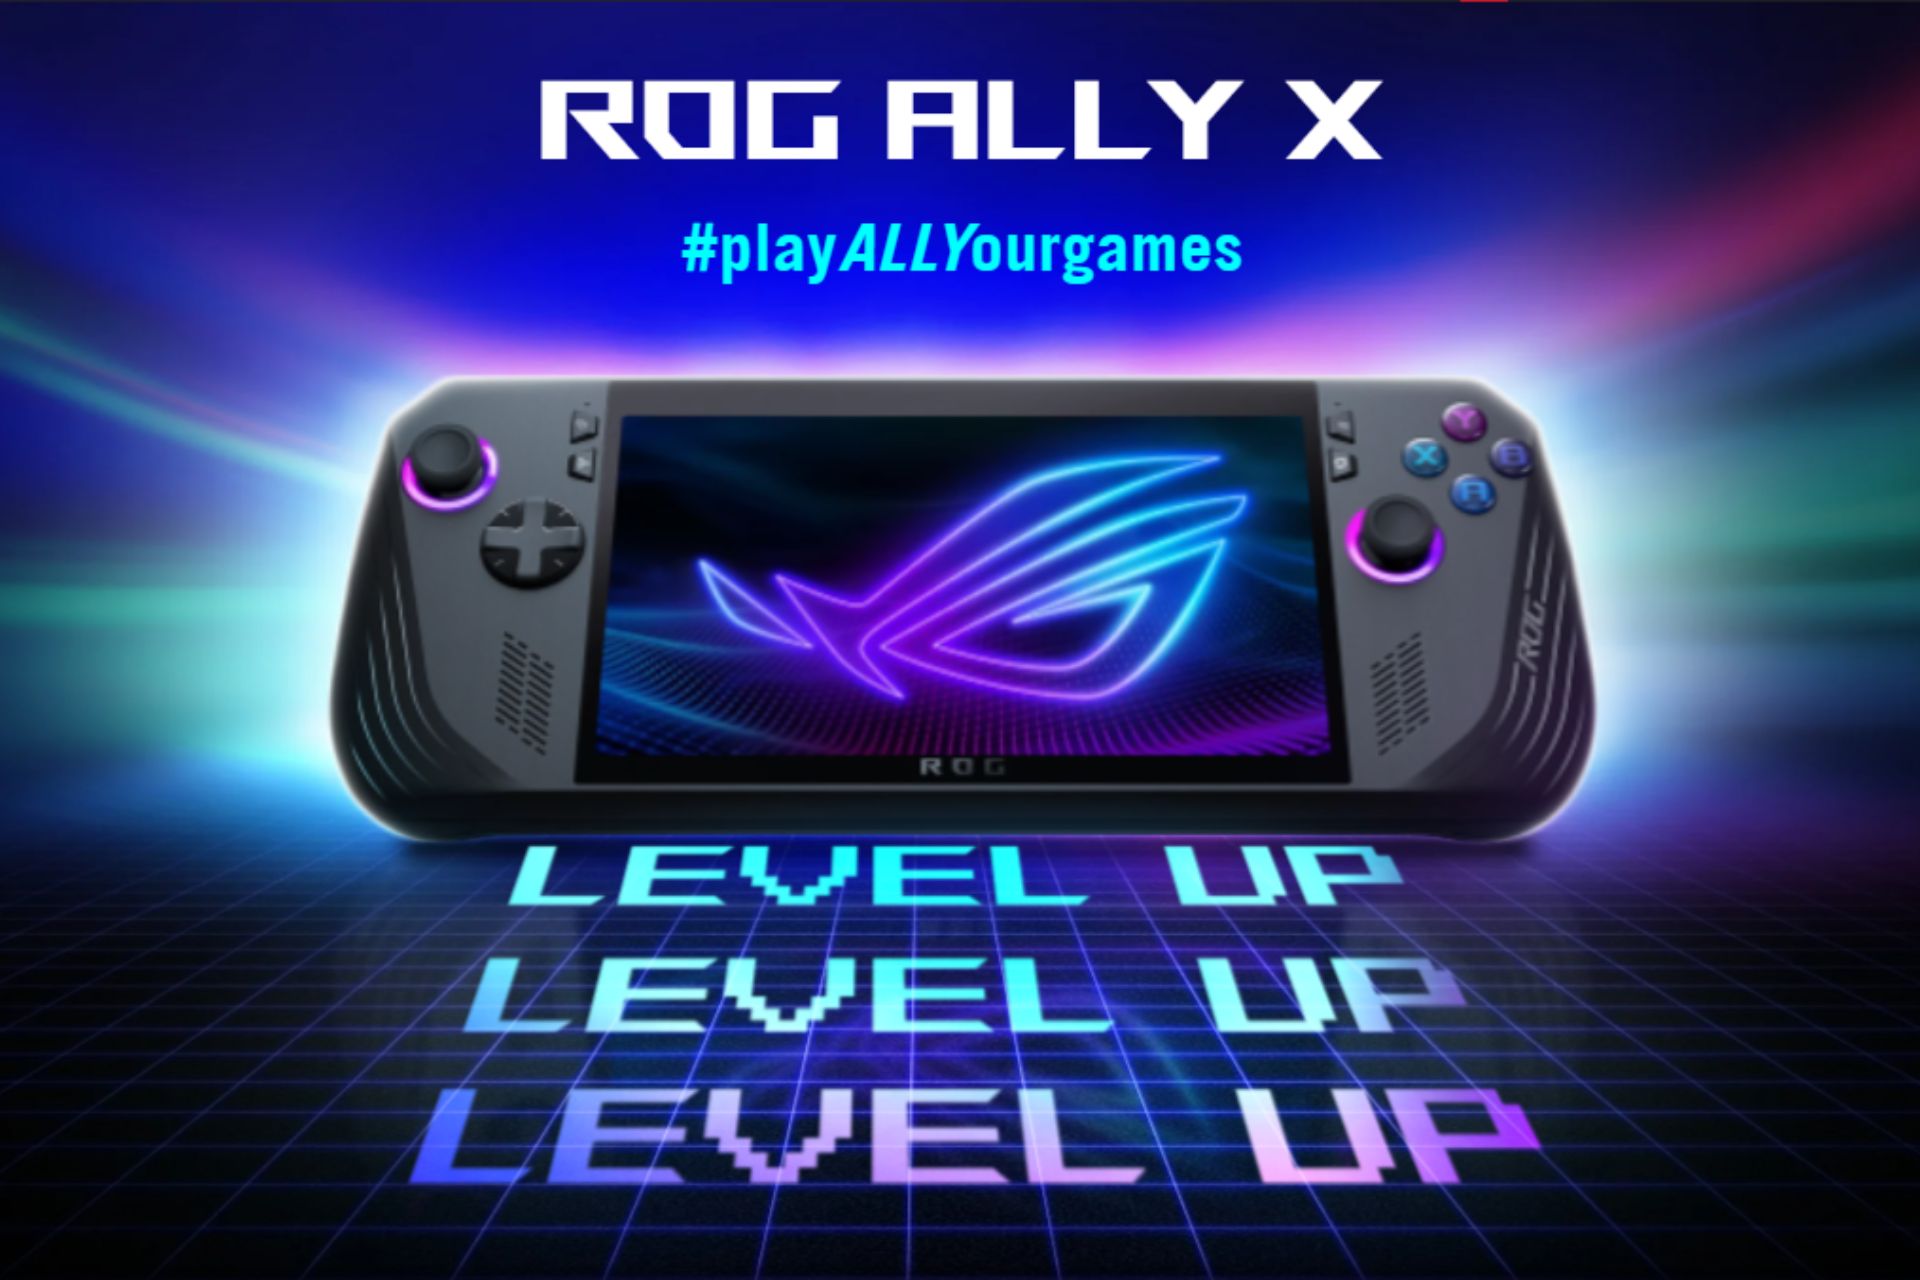 ASUS ROG Ally X is now official with better battery life, increased RAM & more